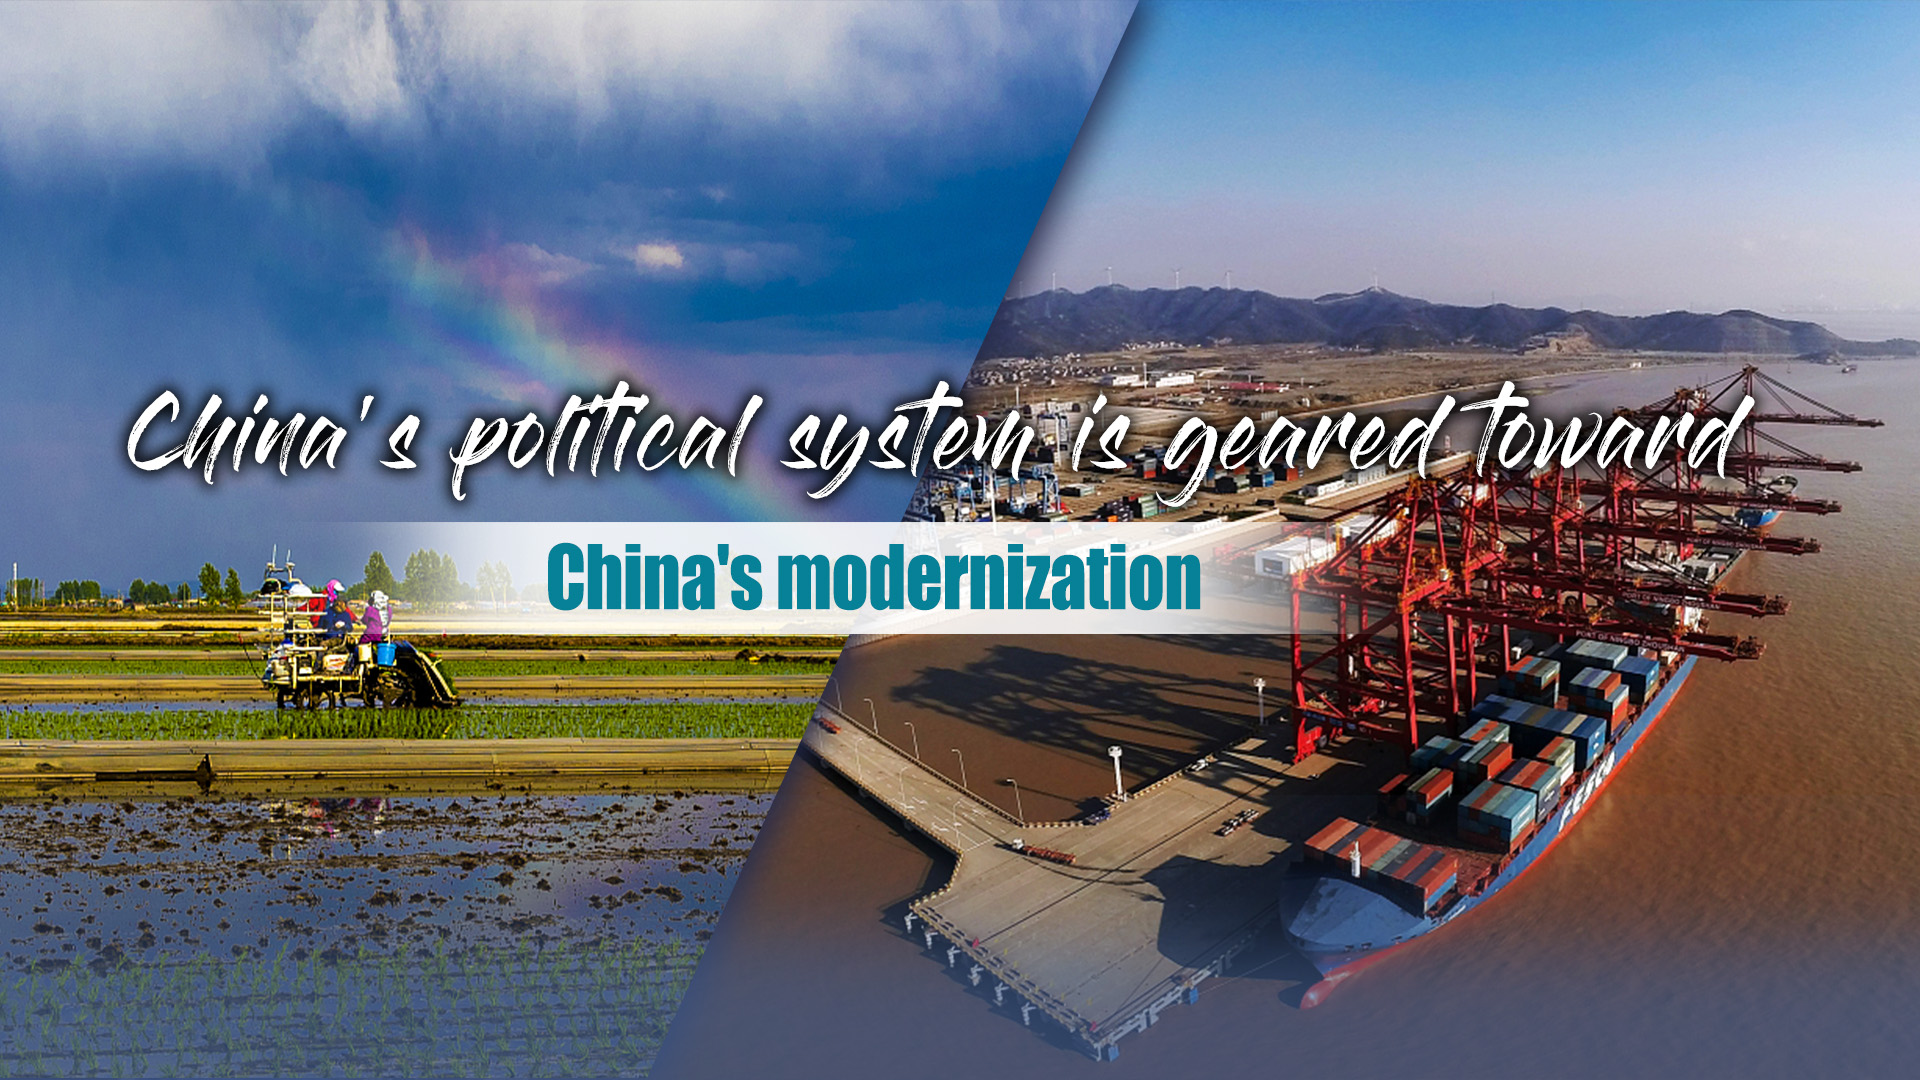 China's political system is geared toward China's modernization